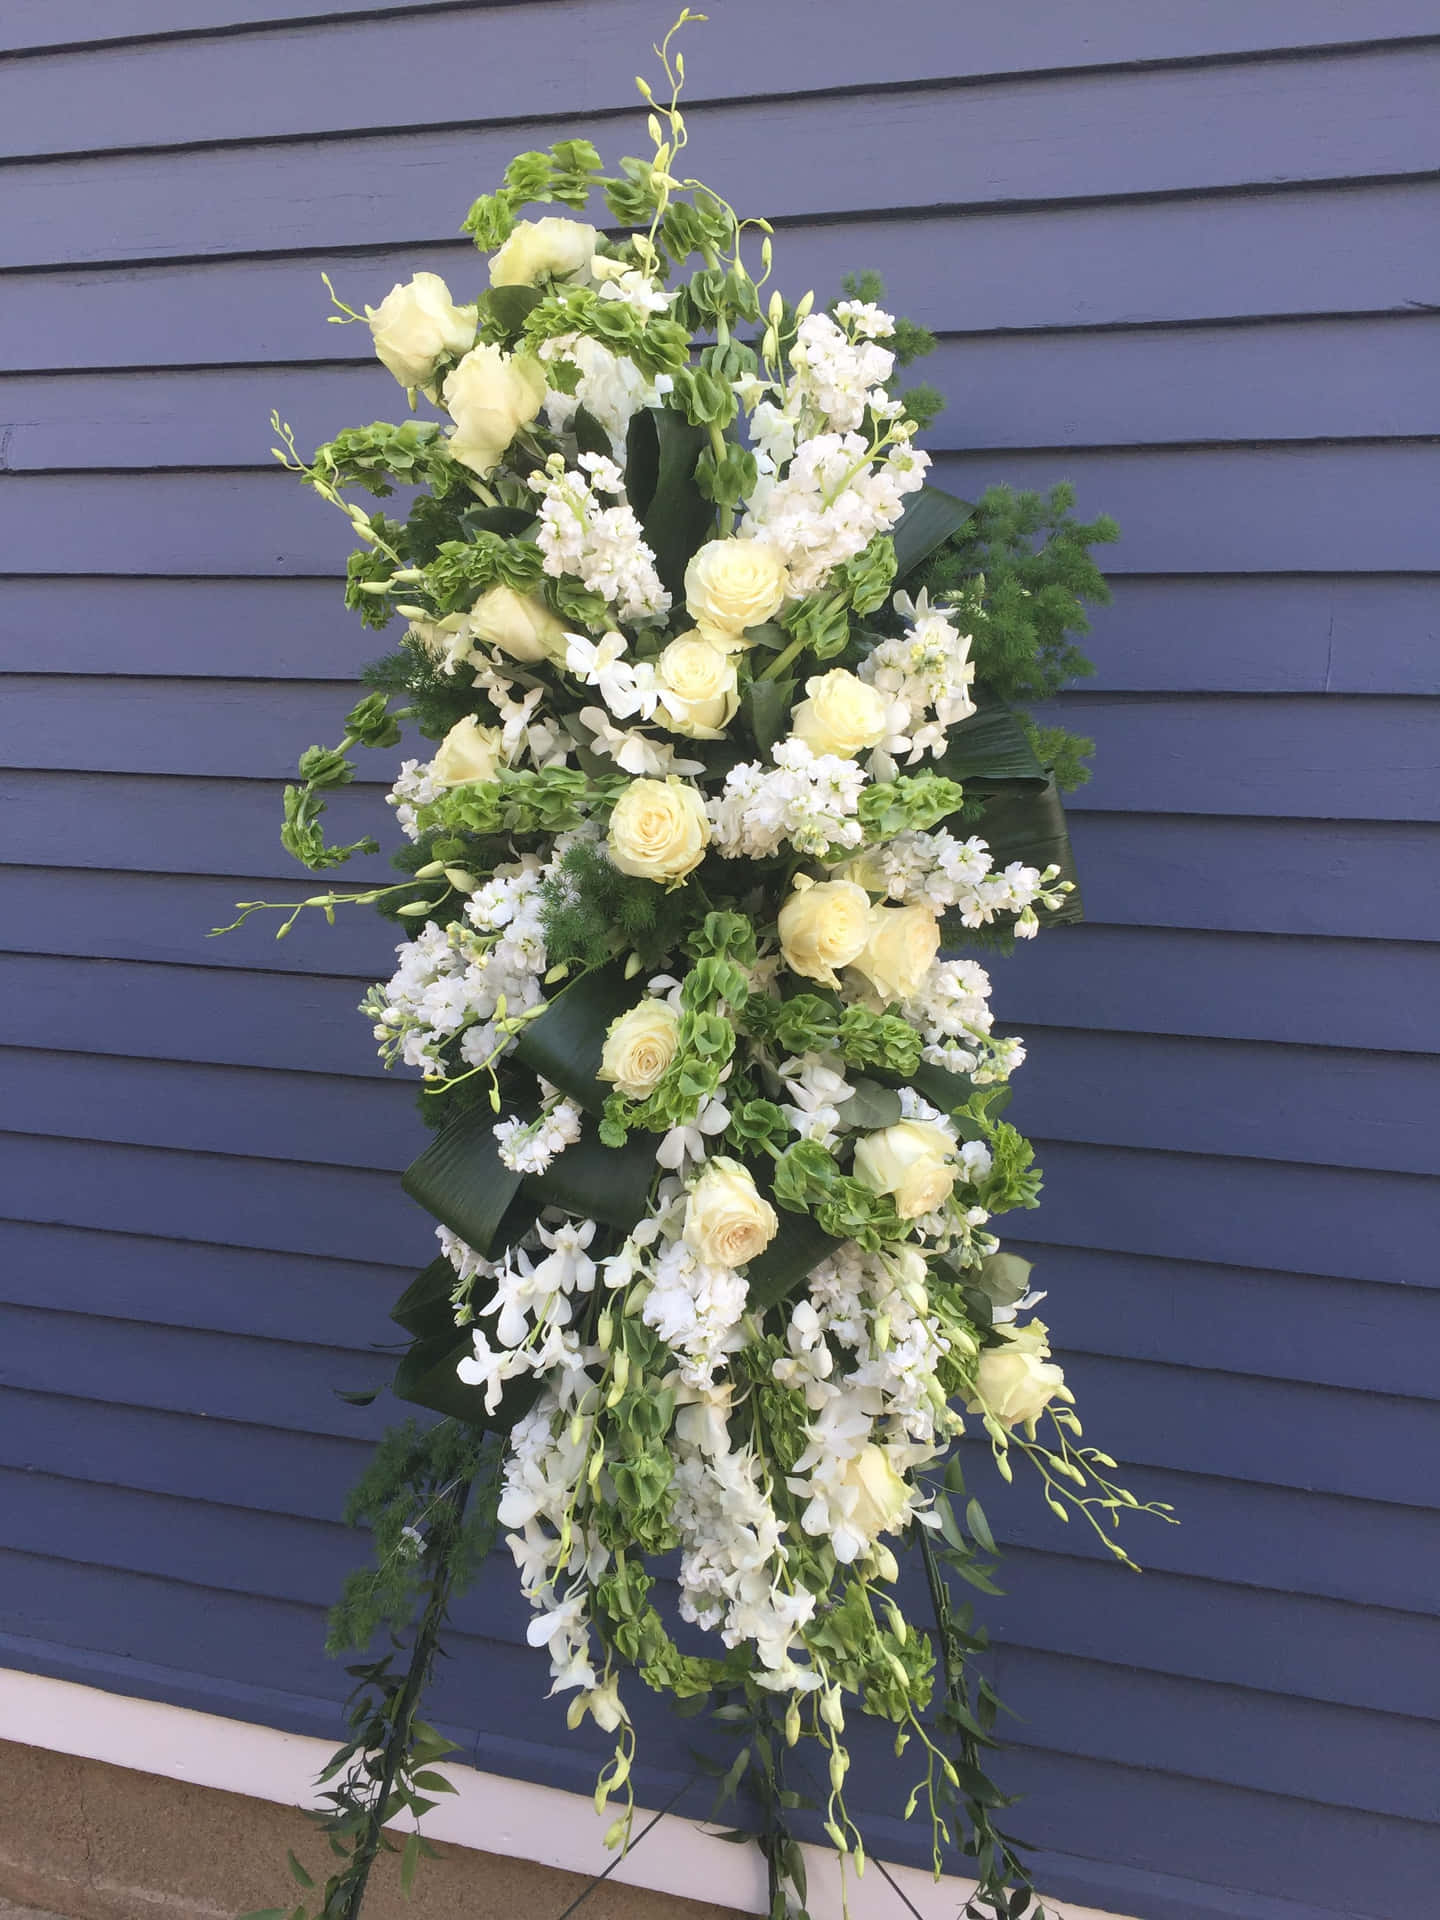 A White And Green Funeral Spray Hanging From A Wall